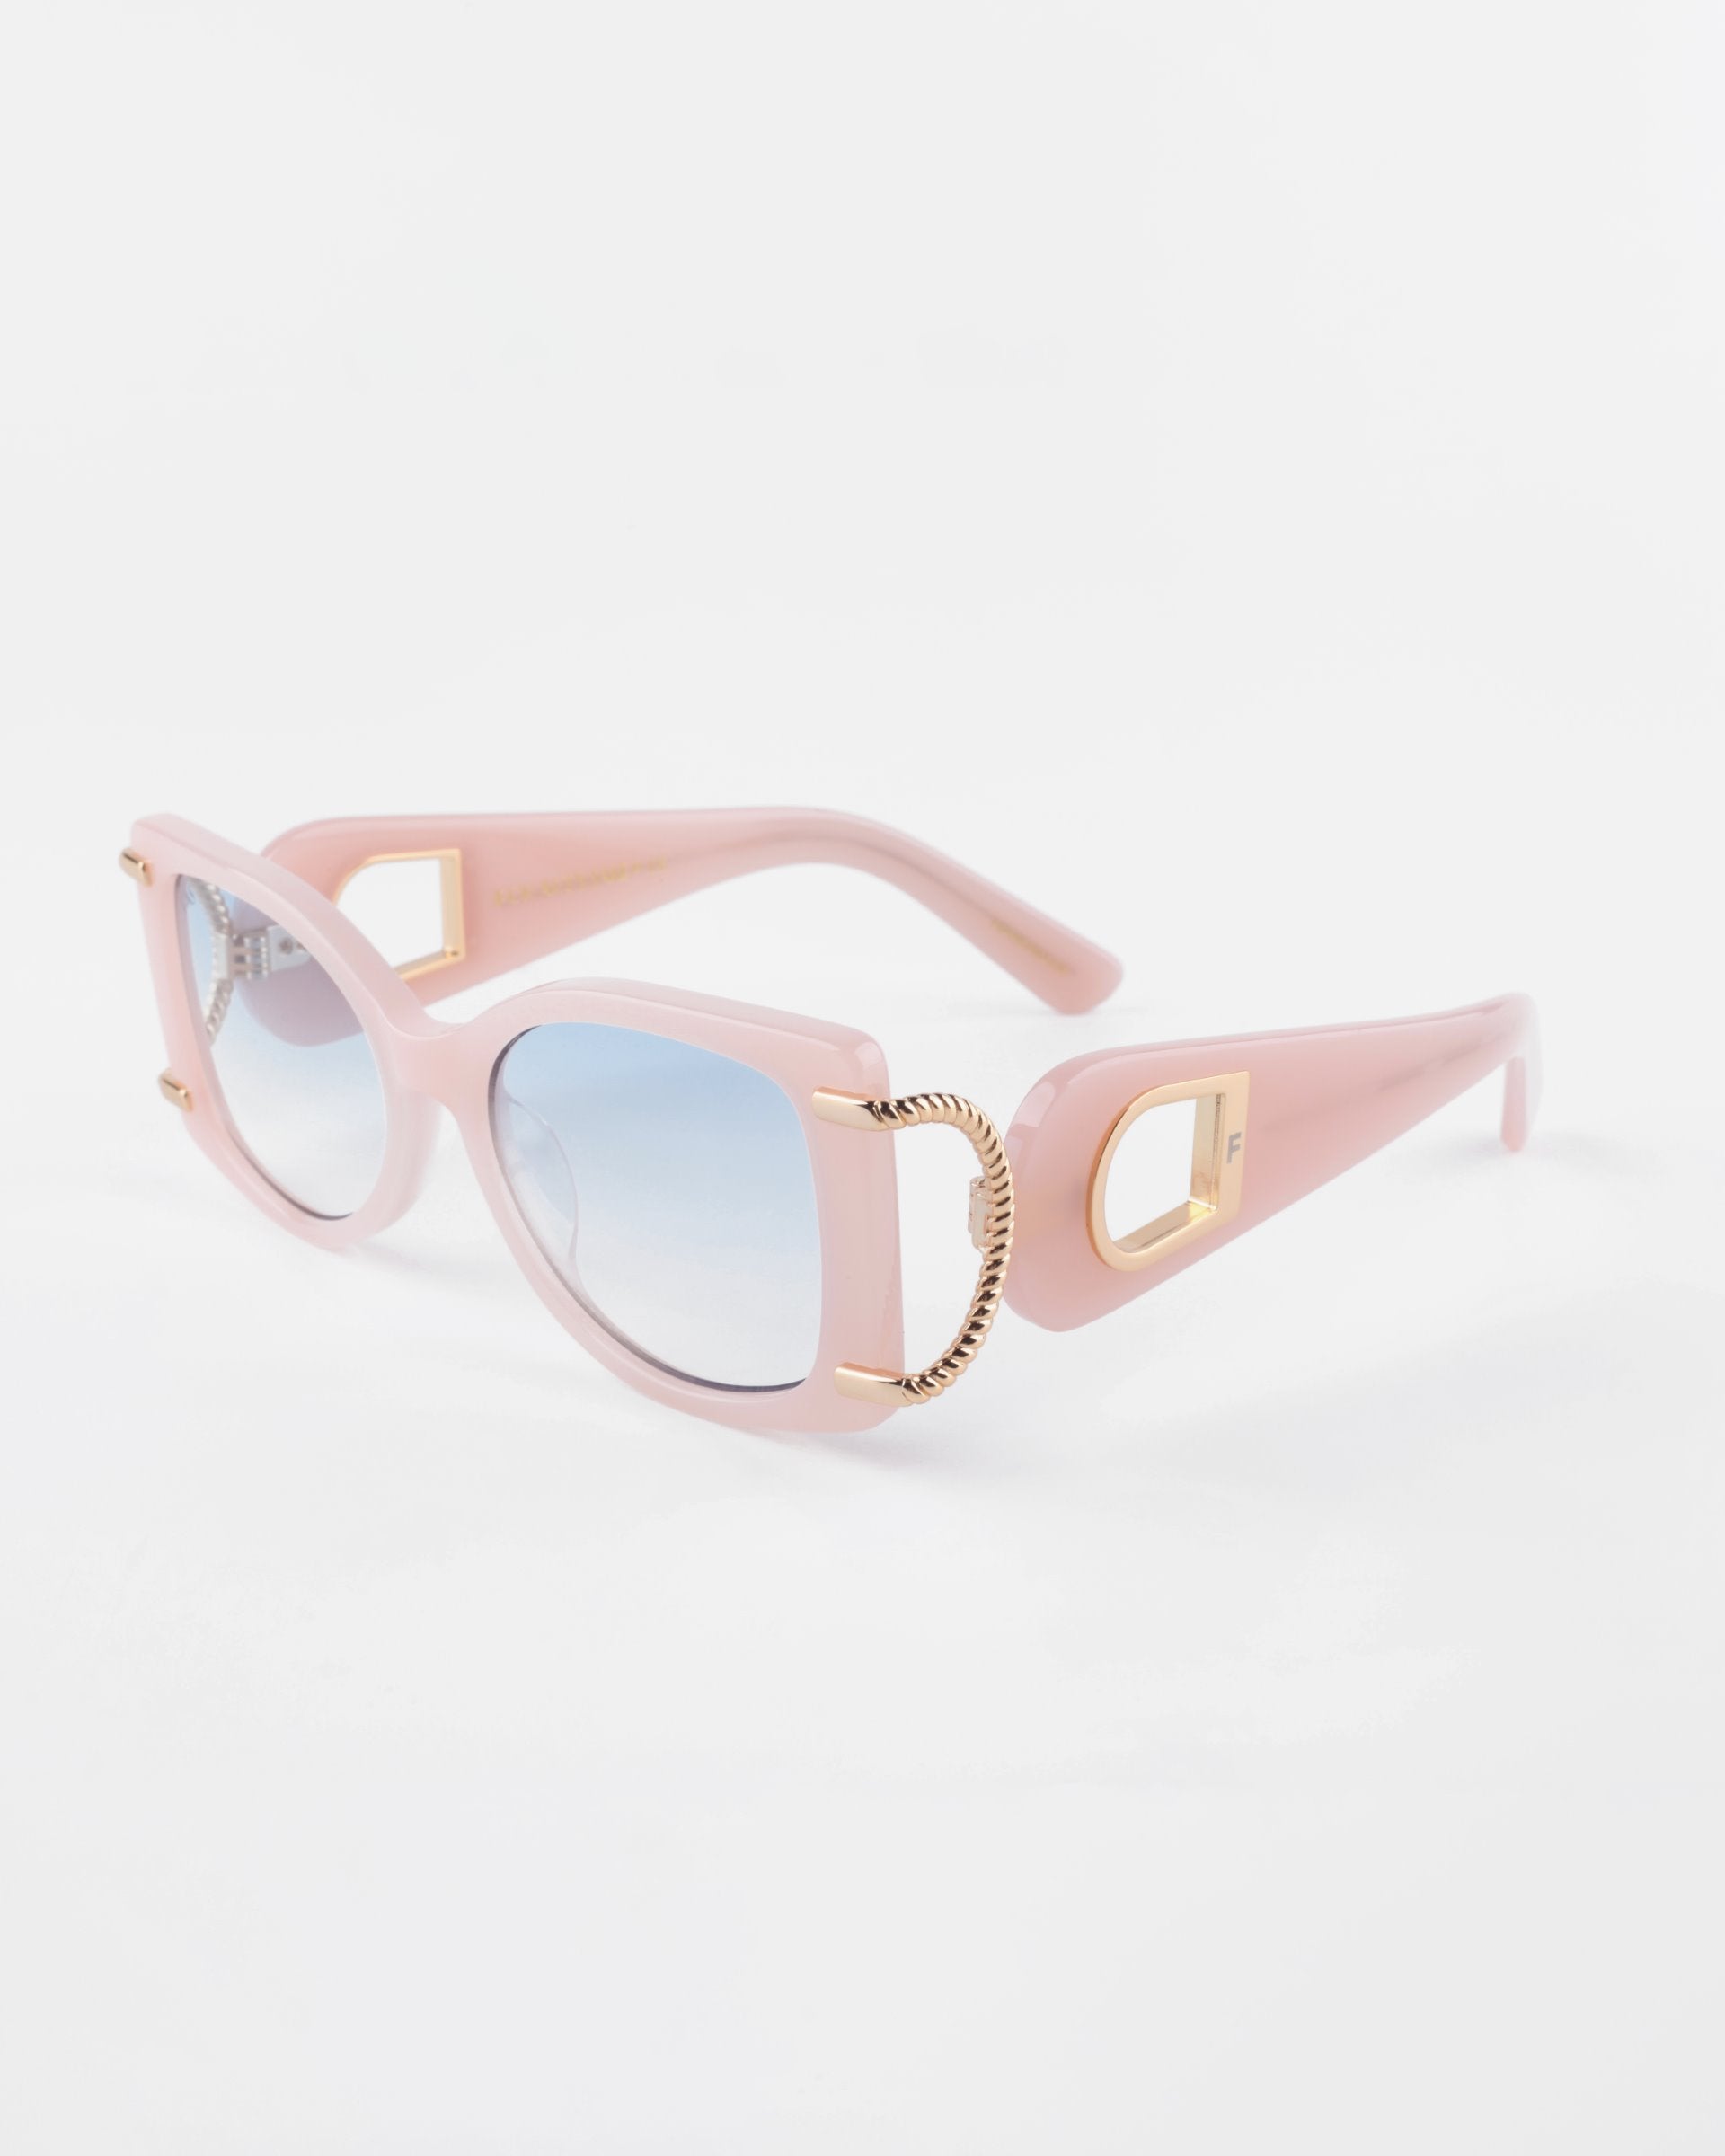 Sculpture by For Art&#39;s Sake®: Pink oversized acetate sunglasses with rectangular blue-tinted lenses. The frames feature 18-karat gold-plated accents around the hinges and a decorative gold chain detail on the temples. The arms are thick with a slight curve, offering 100% UVA &amp; UVB protection in a stylishly retro design.